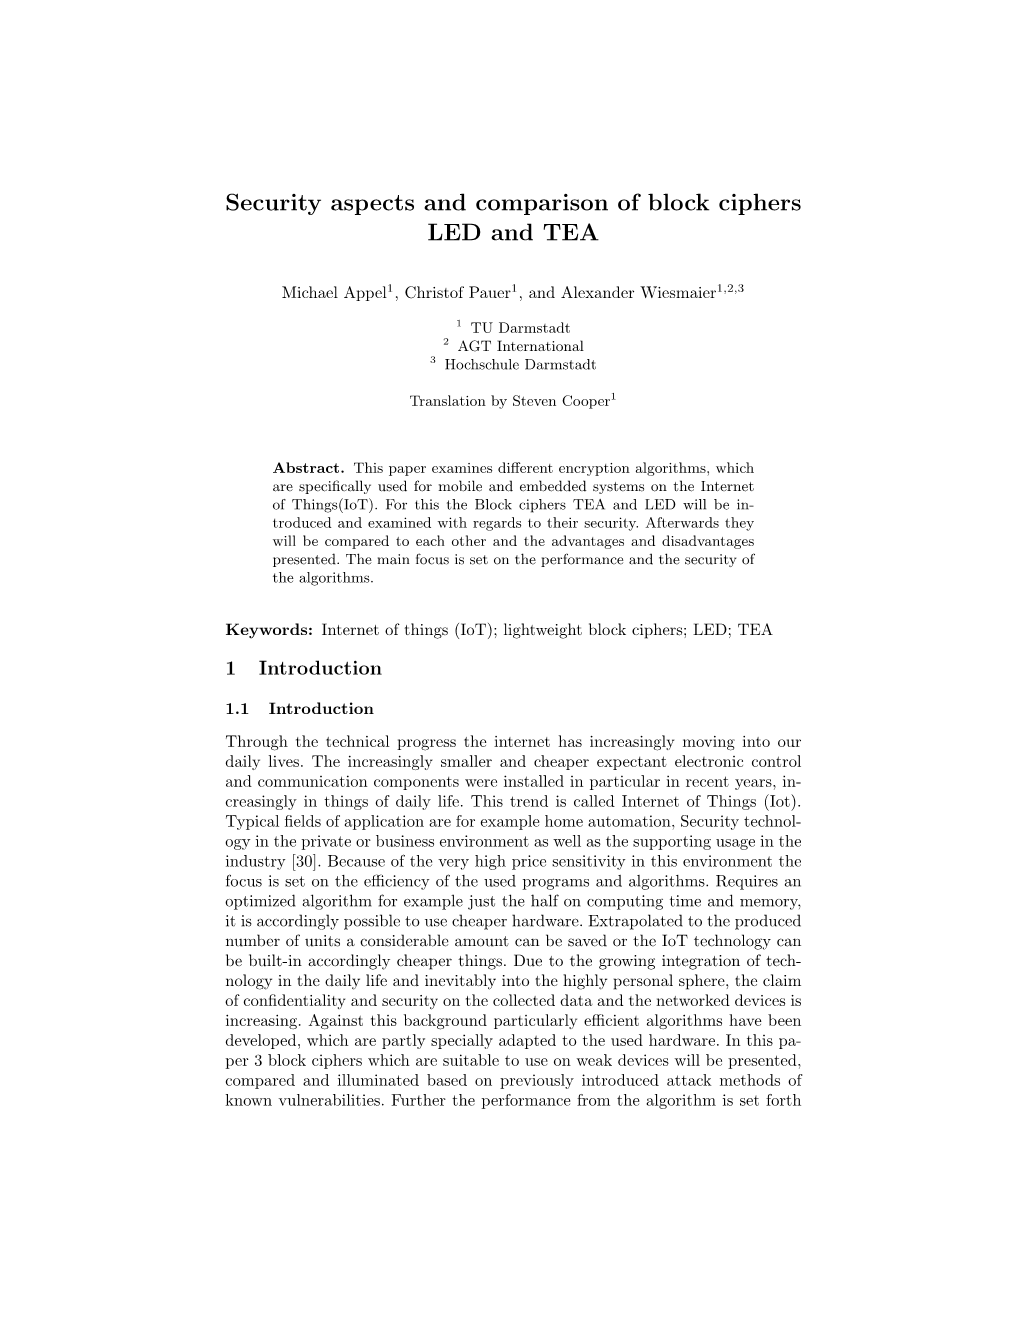 Security Aspects and Comparison of Block Ciphers LED and TEA